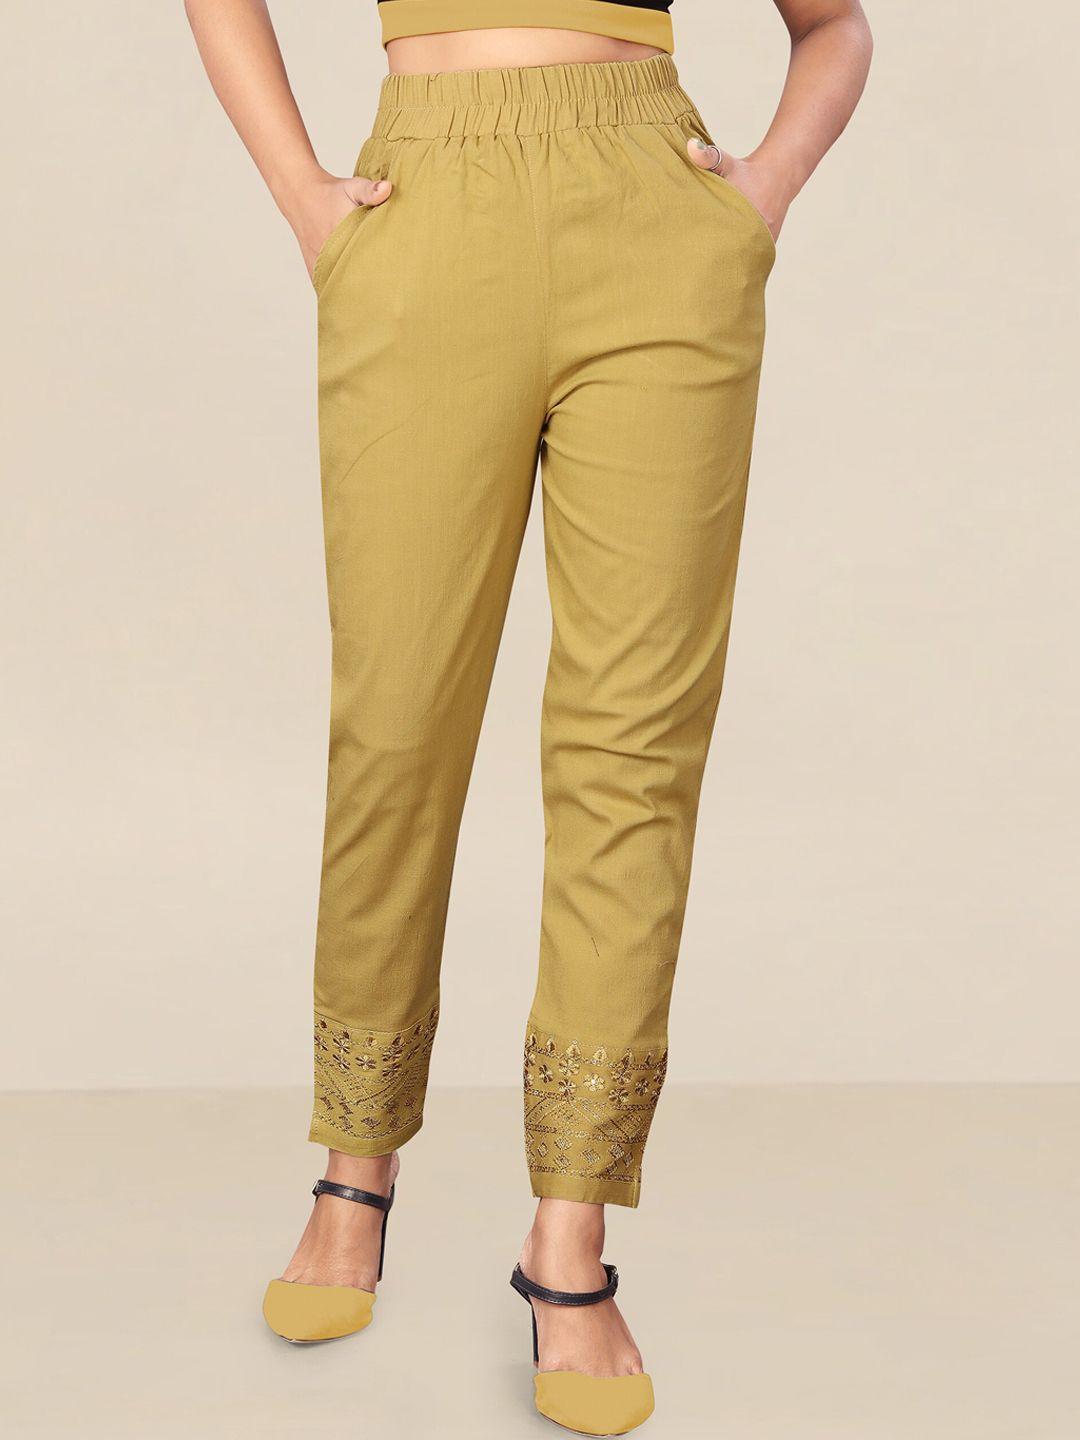 united liberty women gold-toned relaxed easy wash regular fit trousers